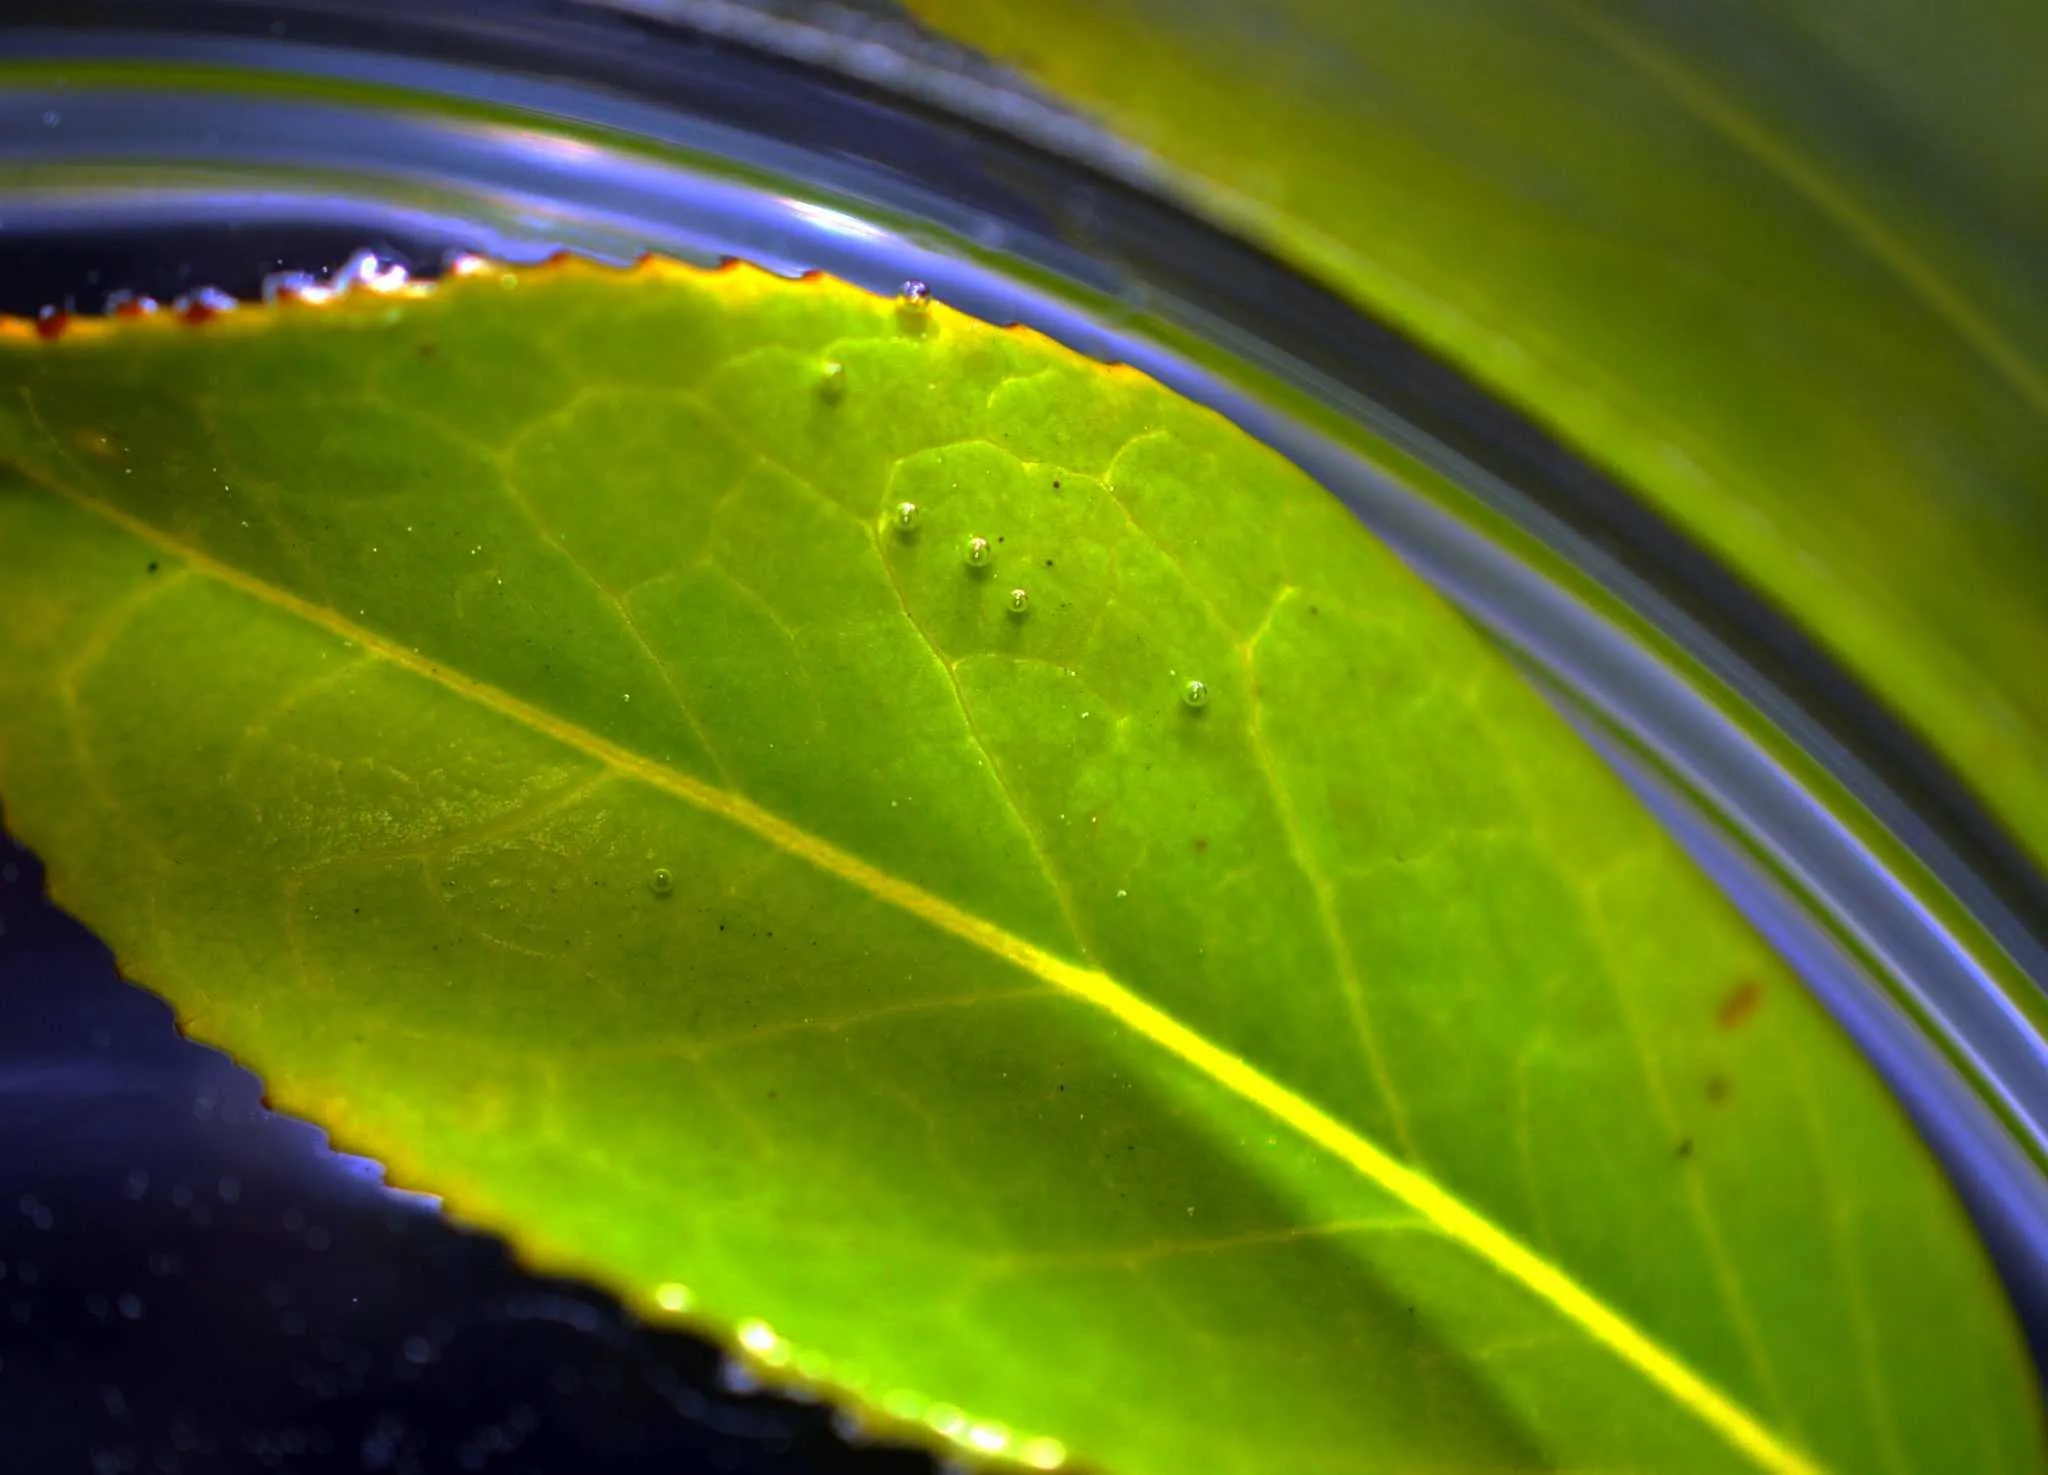 Leaf in water, air bubbles on leaf